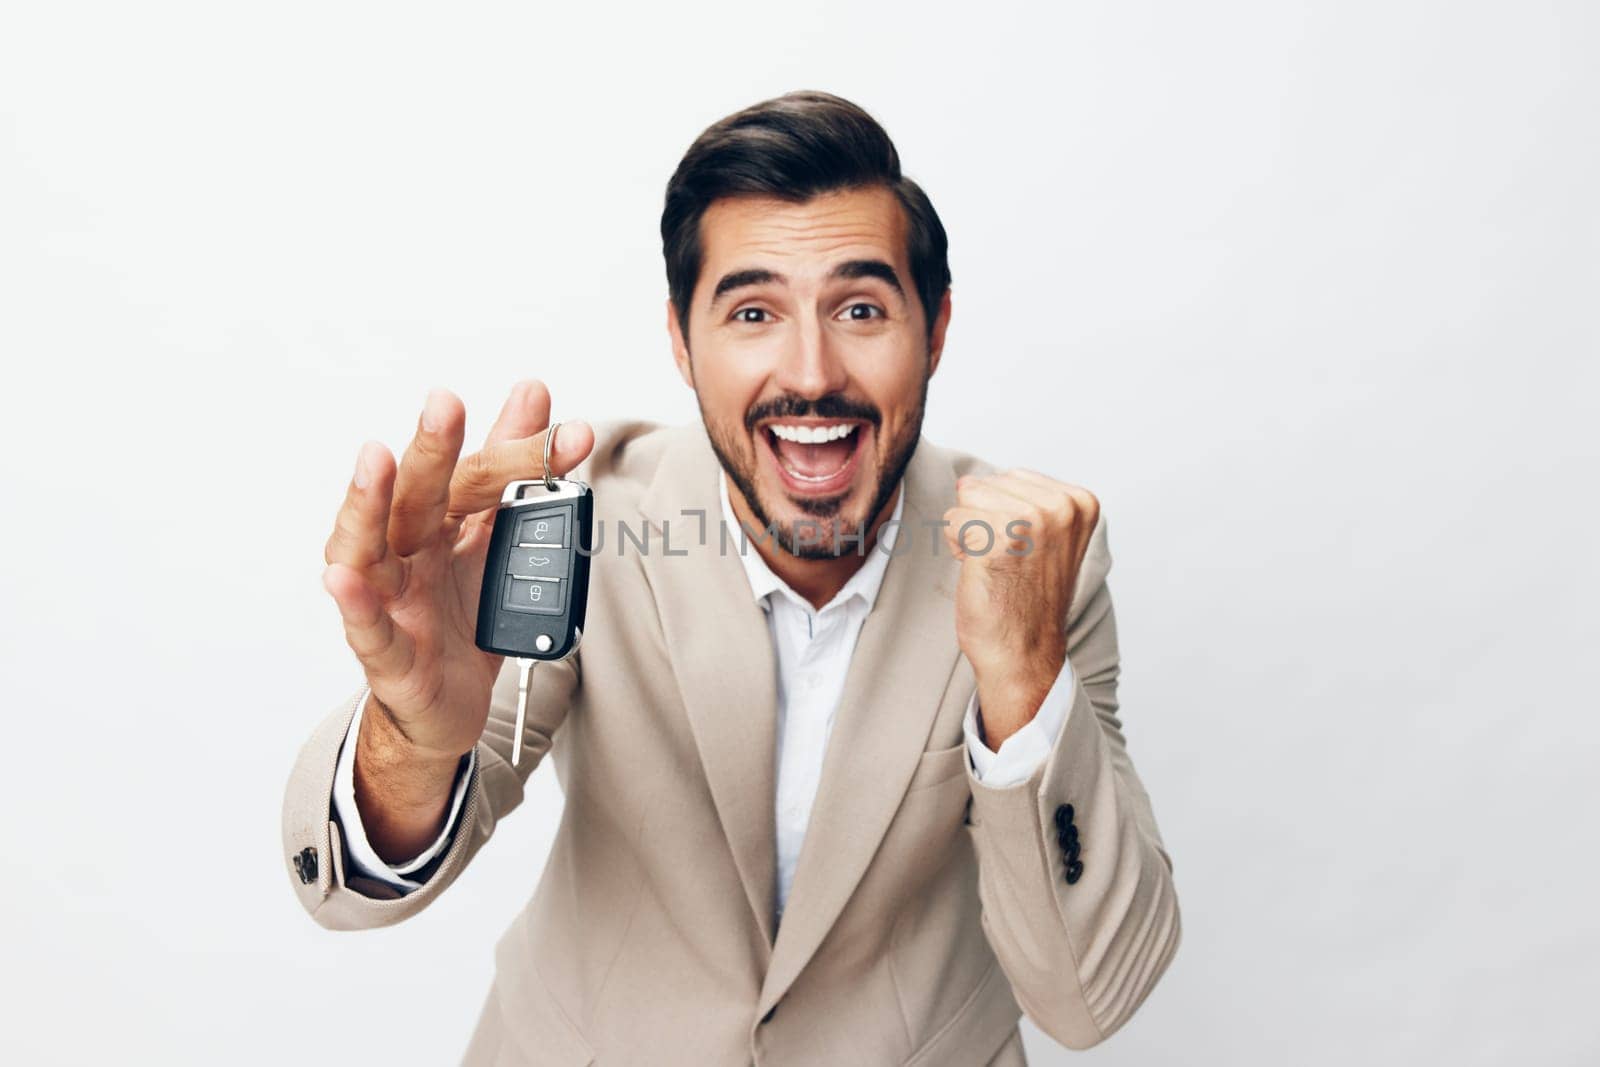 man smile hand holding key car auto service studio buy business by SHOTPRIME